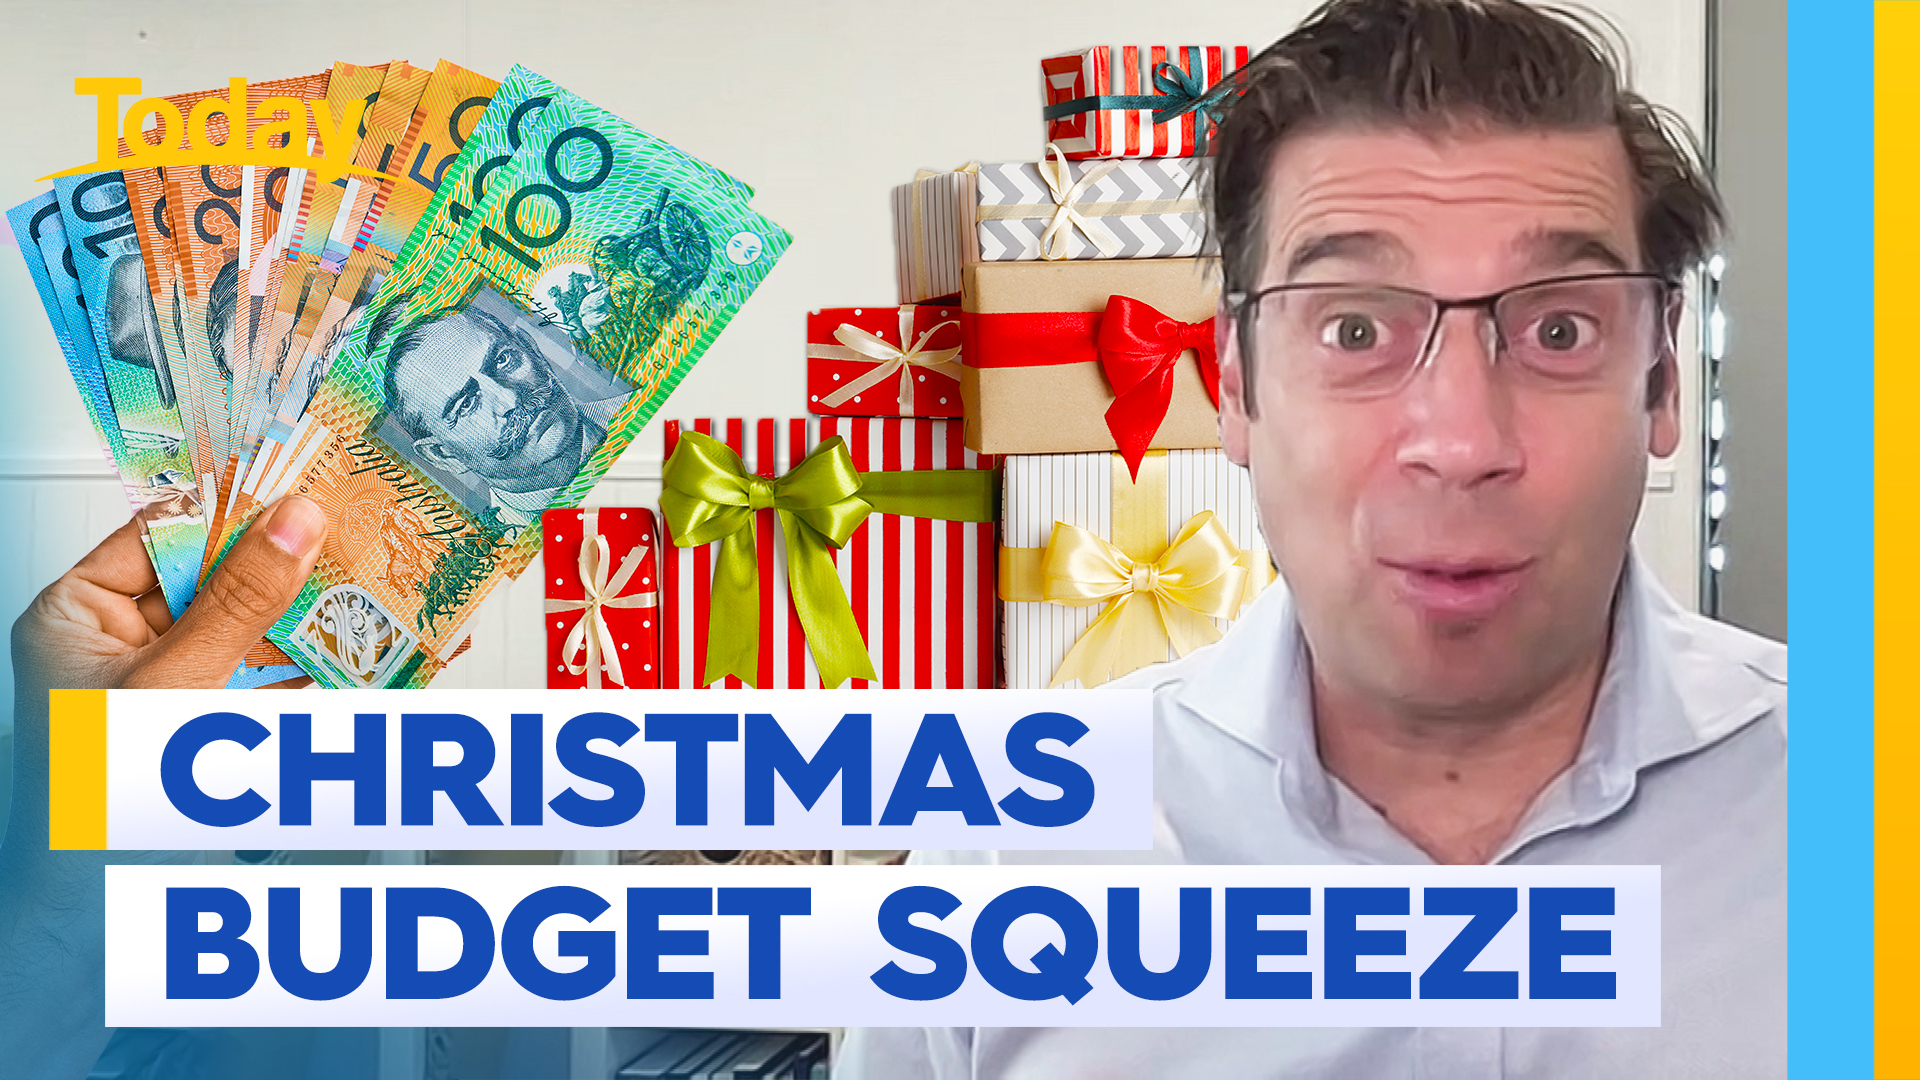 Talking to kids about a budget-friendly Christmas